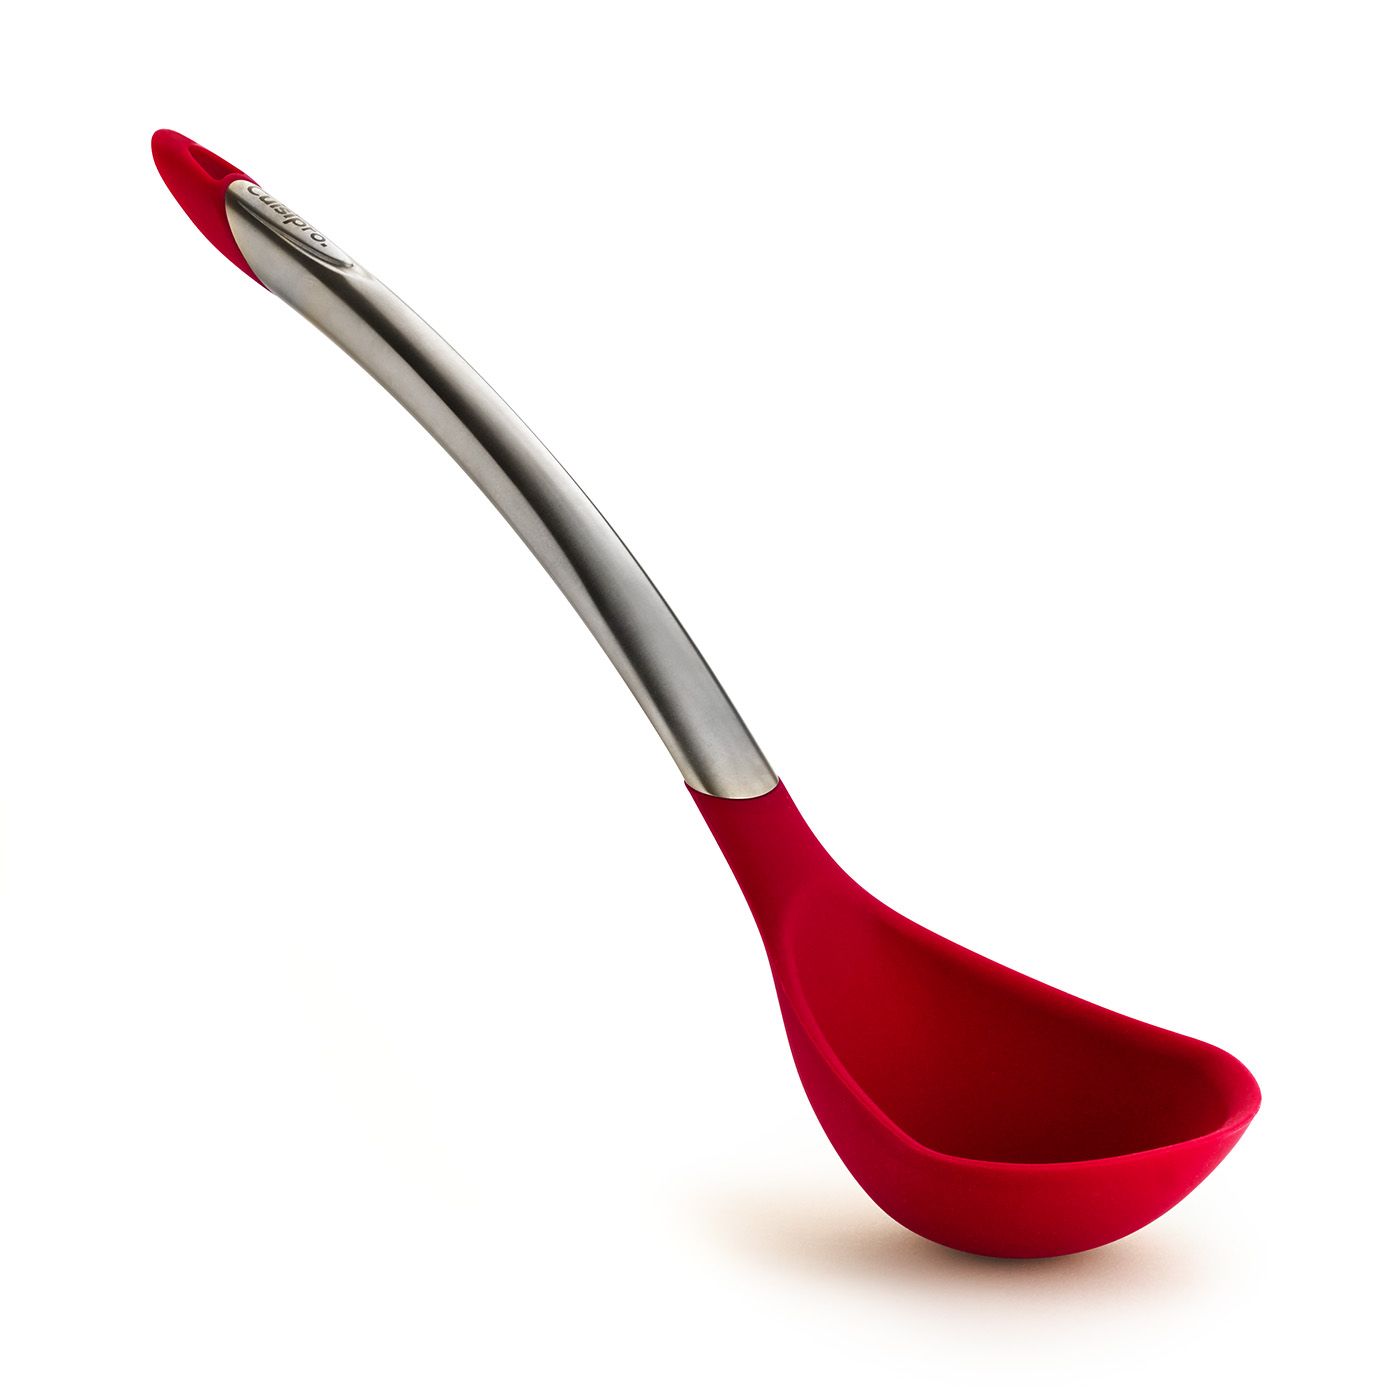 Cuisipro Silicone Ladle 12.25 Red | 7112501L - image 1 of 2